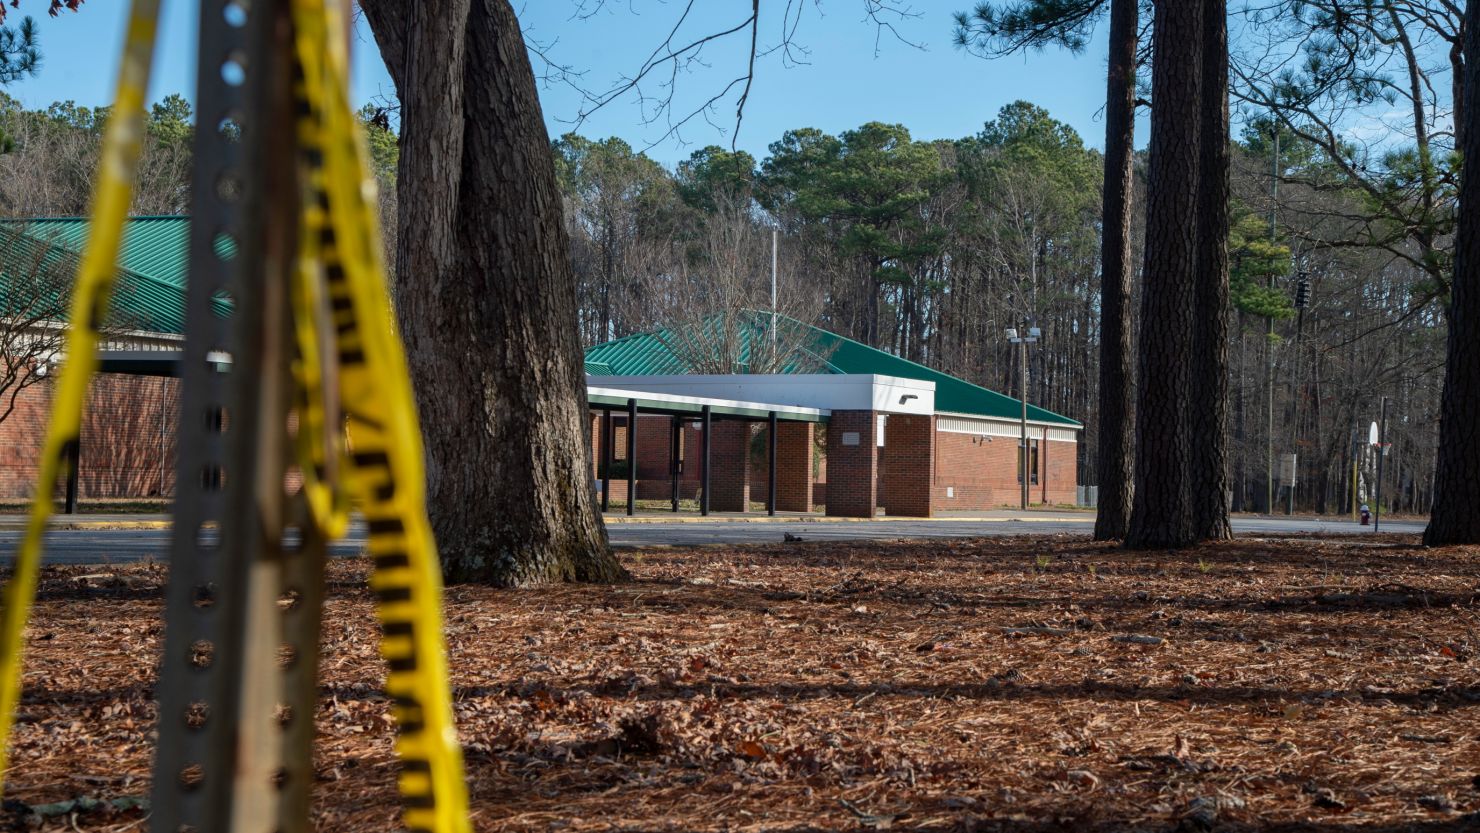 Police tape hangs from a sign post outside Richneck Elementary School.